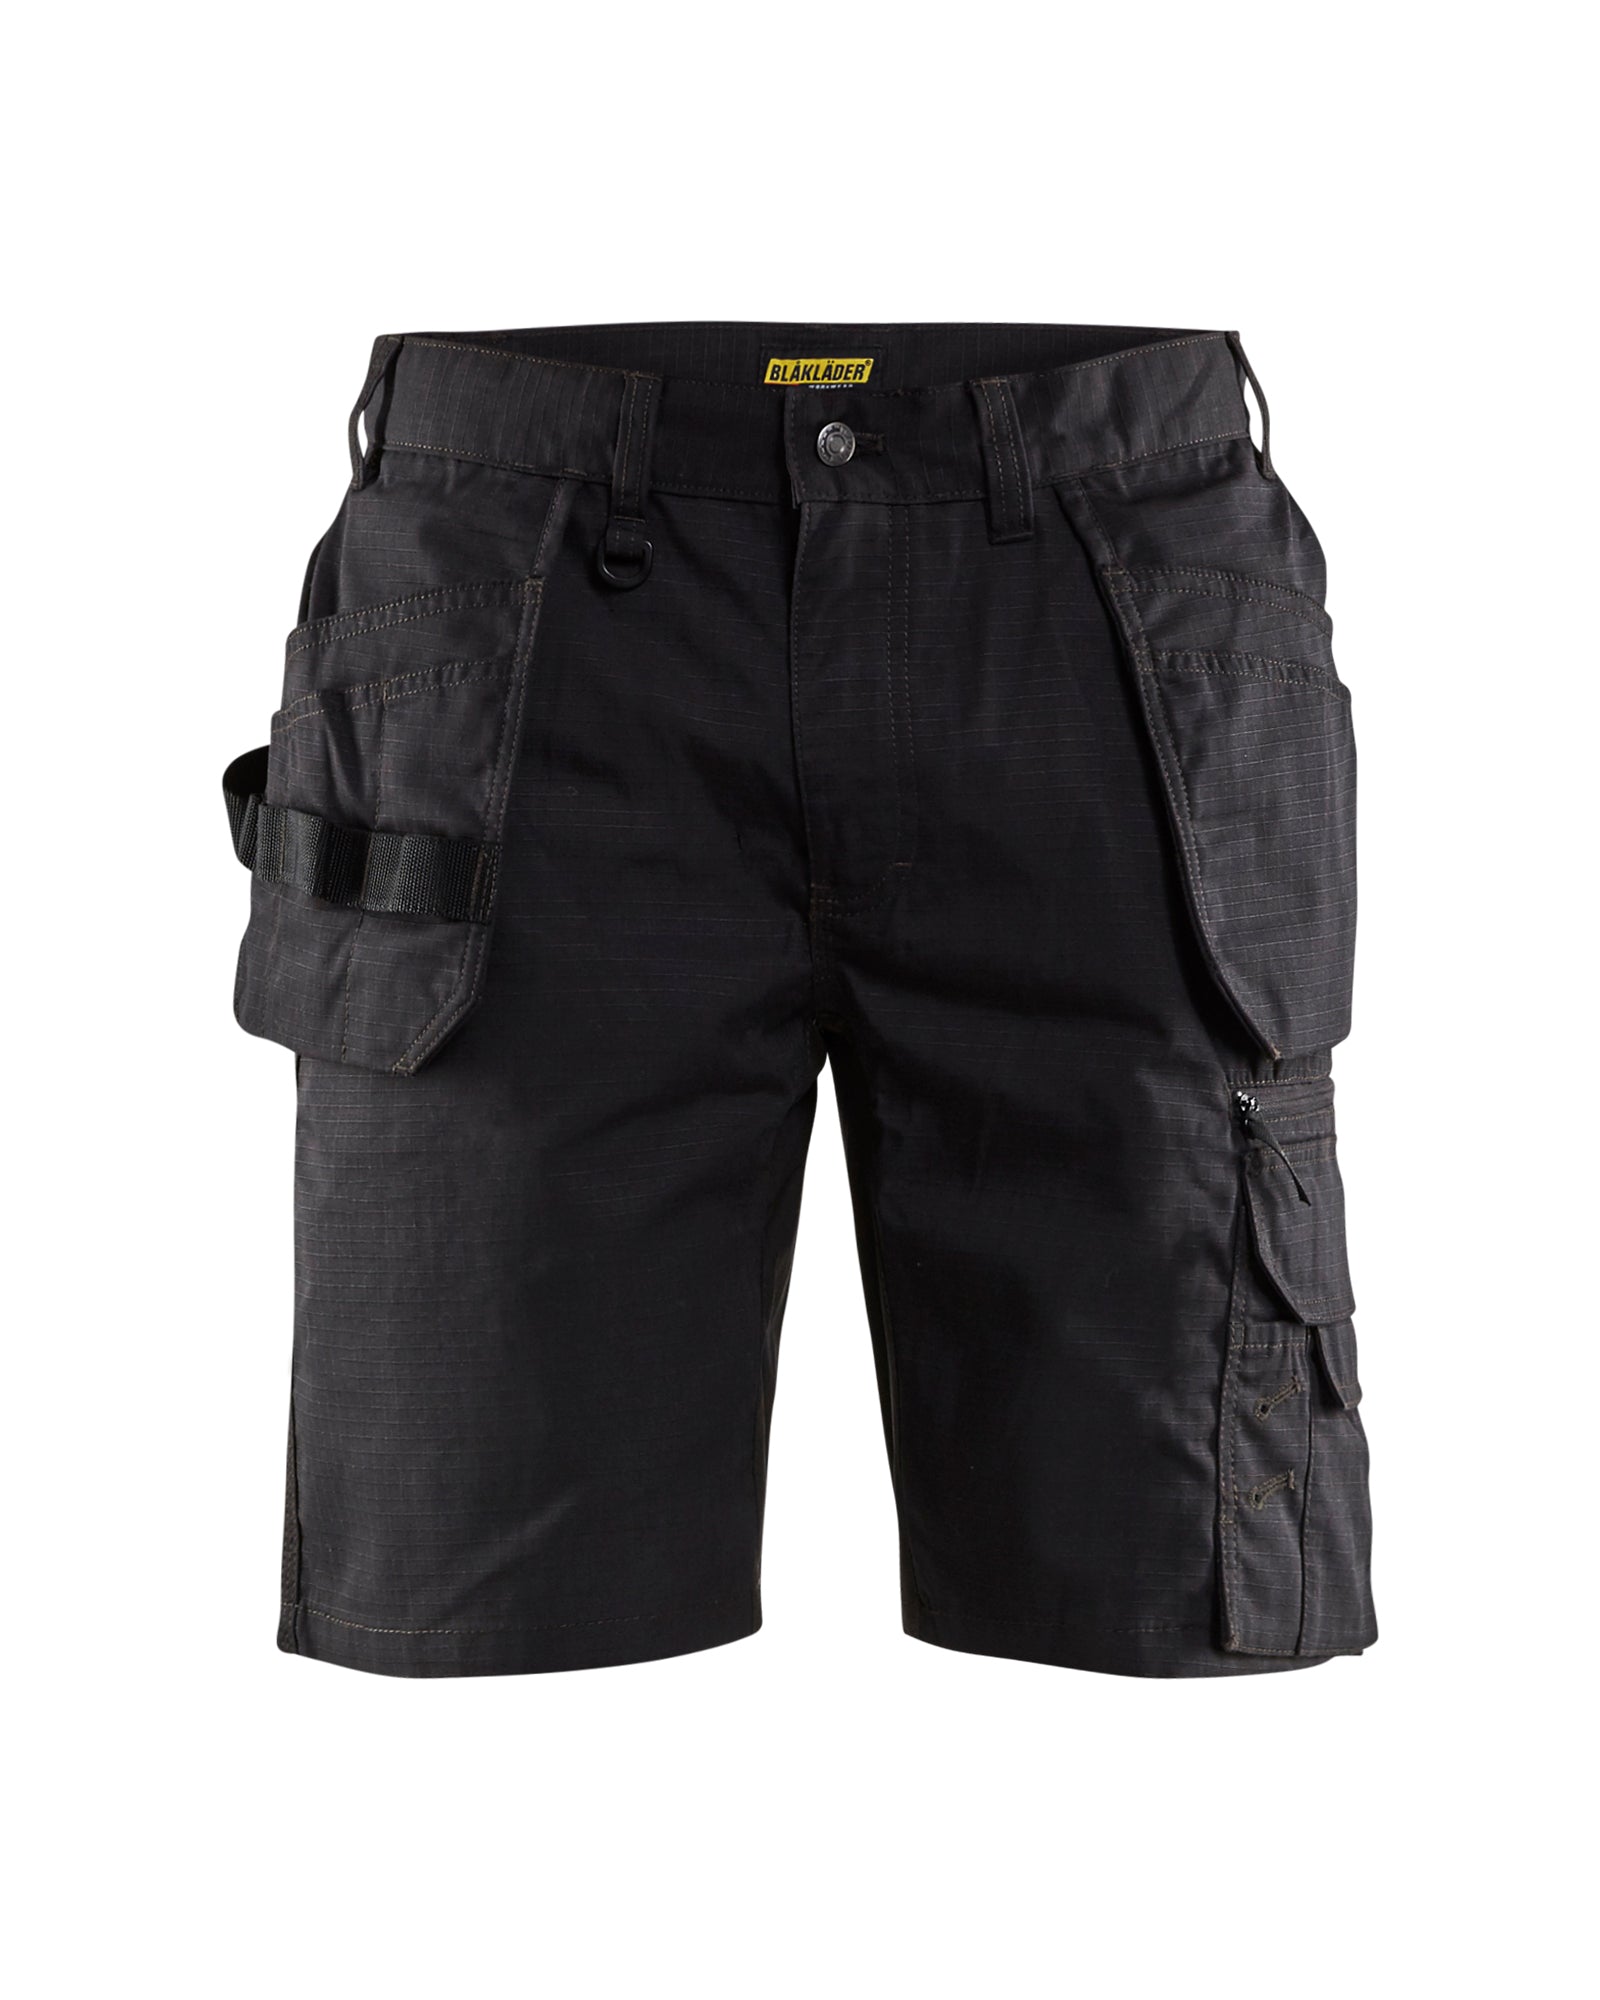 Men's Blaklader US Ripstop with Utility Pockets Short in Black Craftsmen from the front view